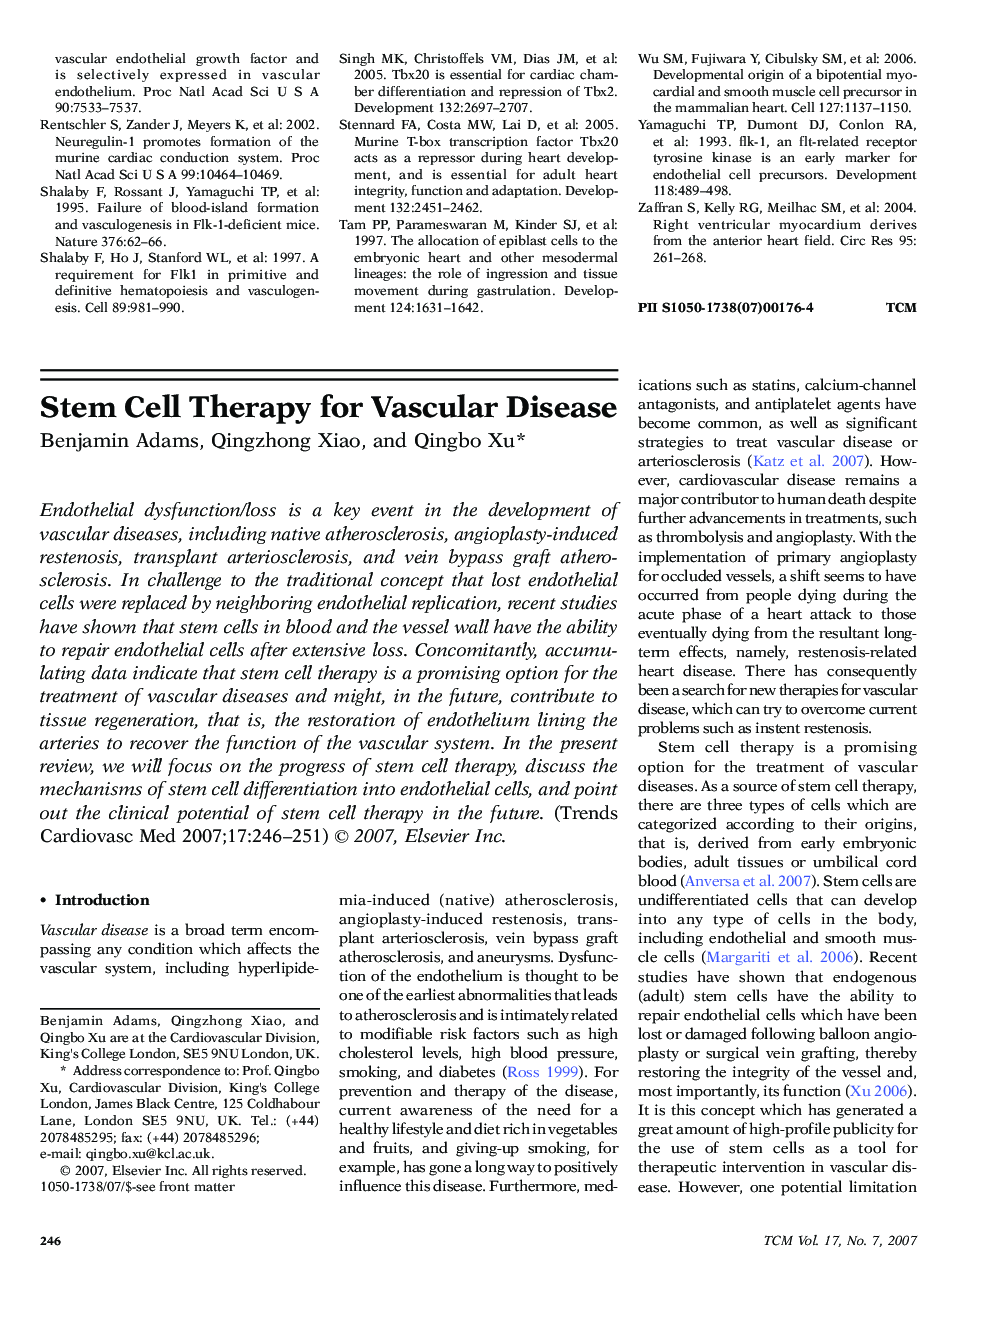 Stem Cell Therapy for Vascular Disease